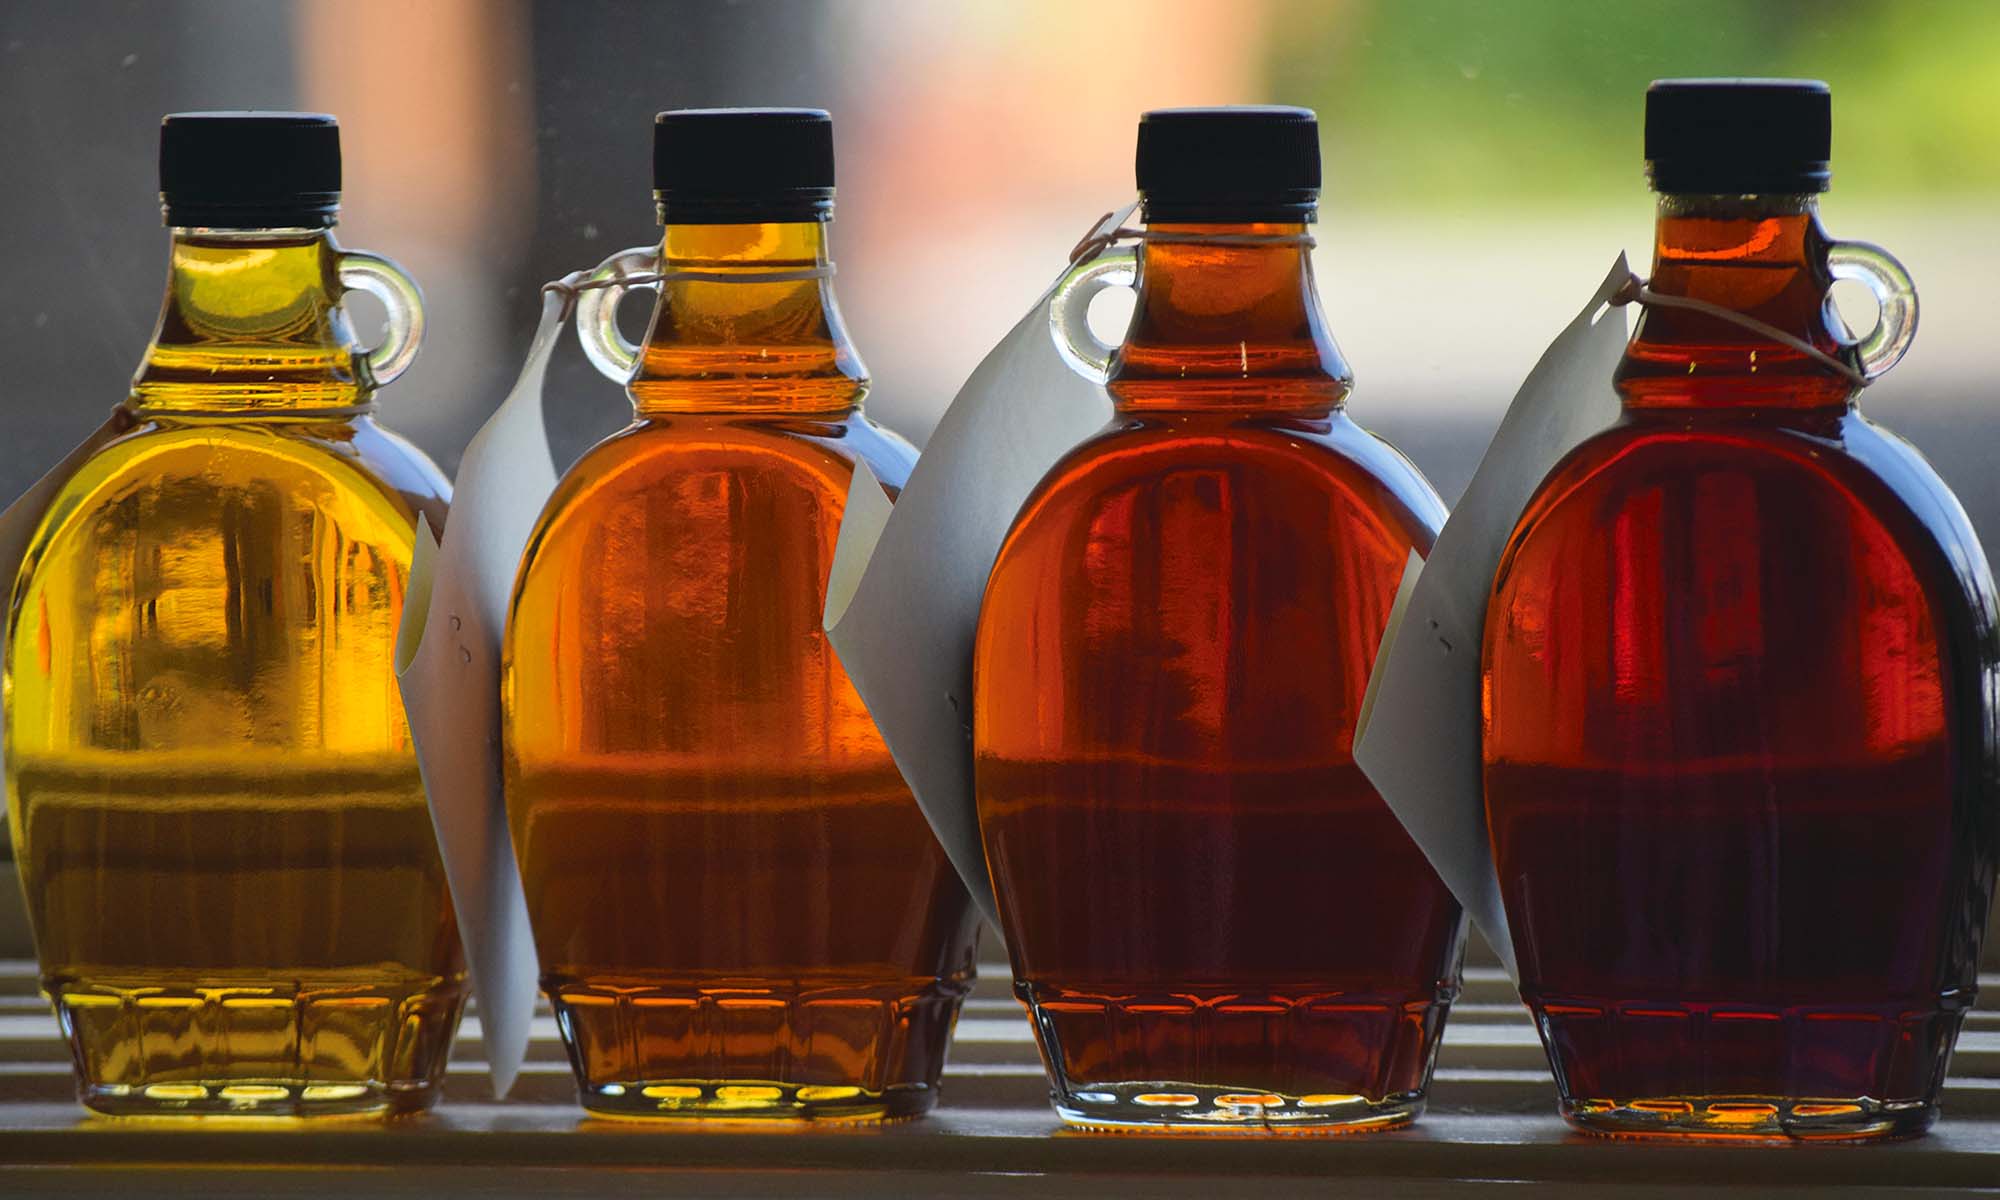 Four bottles of maple syrup on a window sill, arranged from light to dark amber.